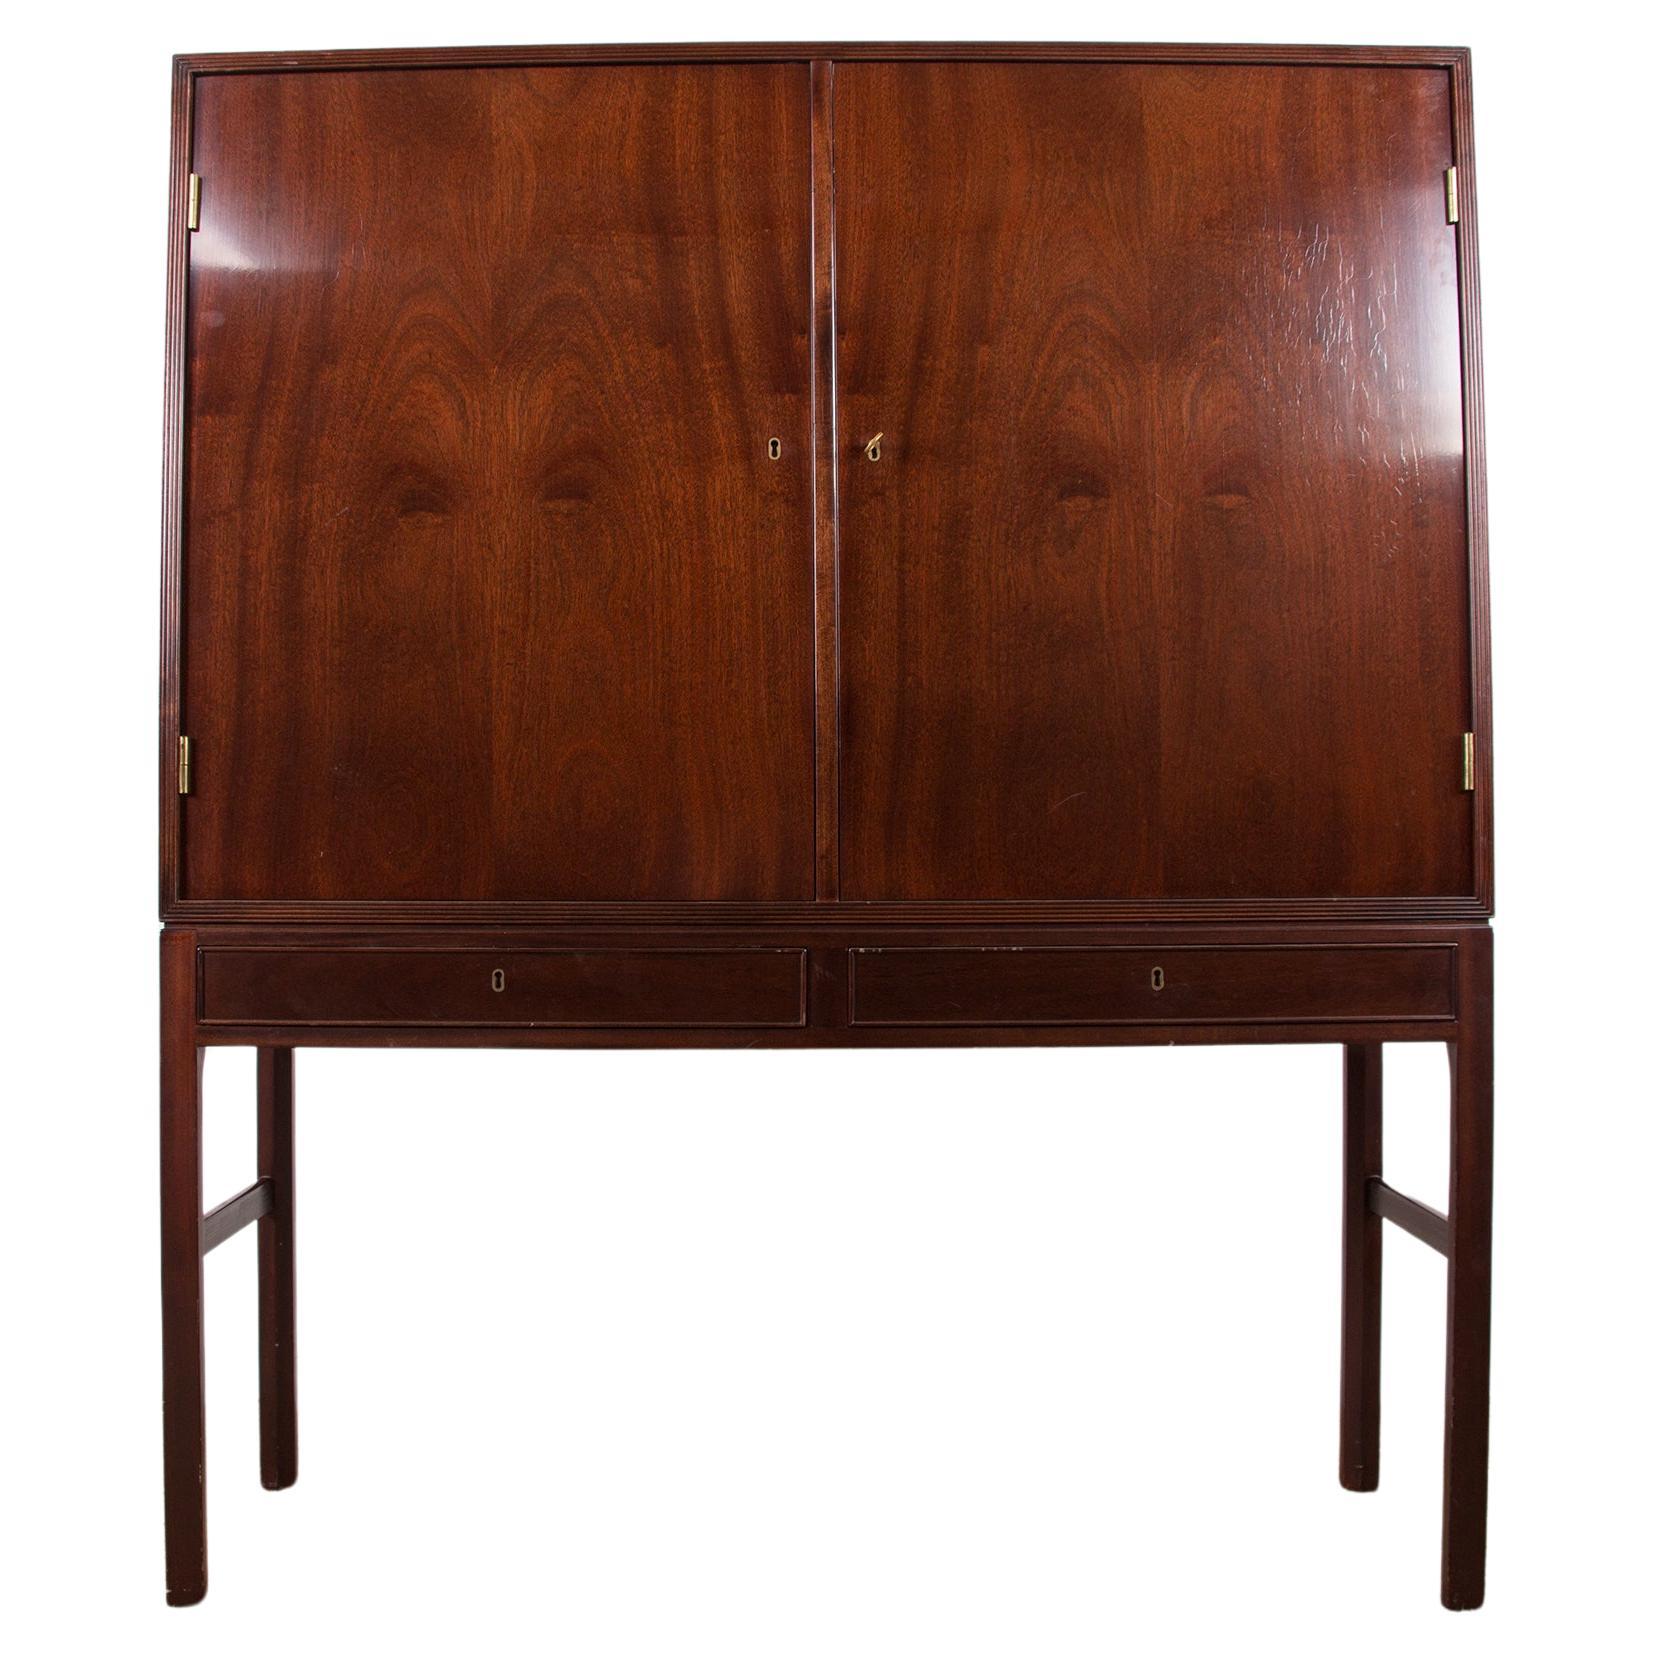 High Danish Cabinet in Mahogany and Brass by Ole Wanscher for Poul Jeppesen 1960